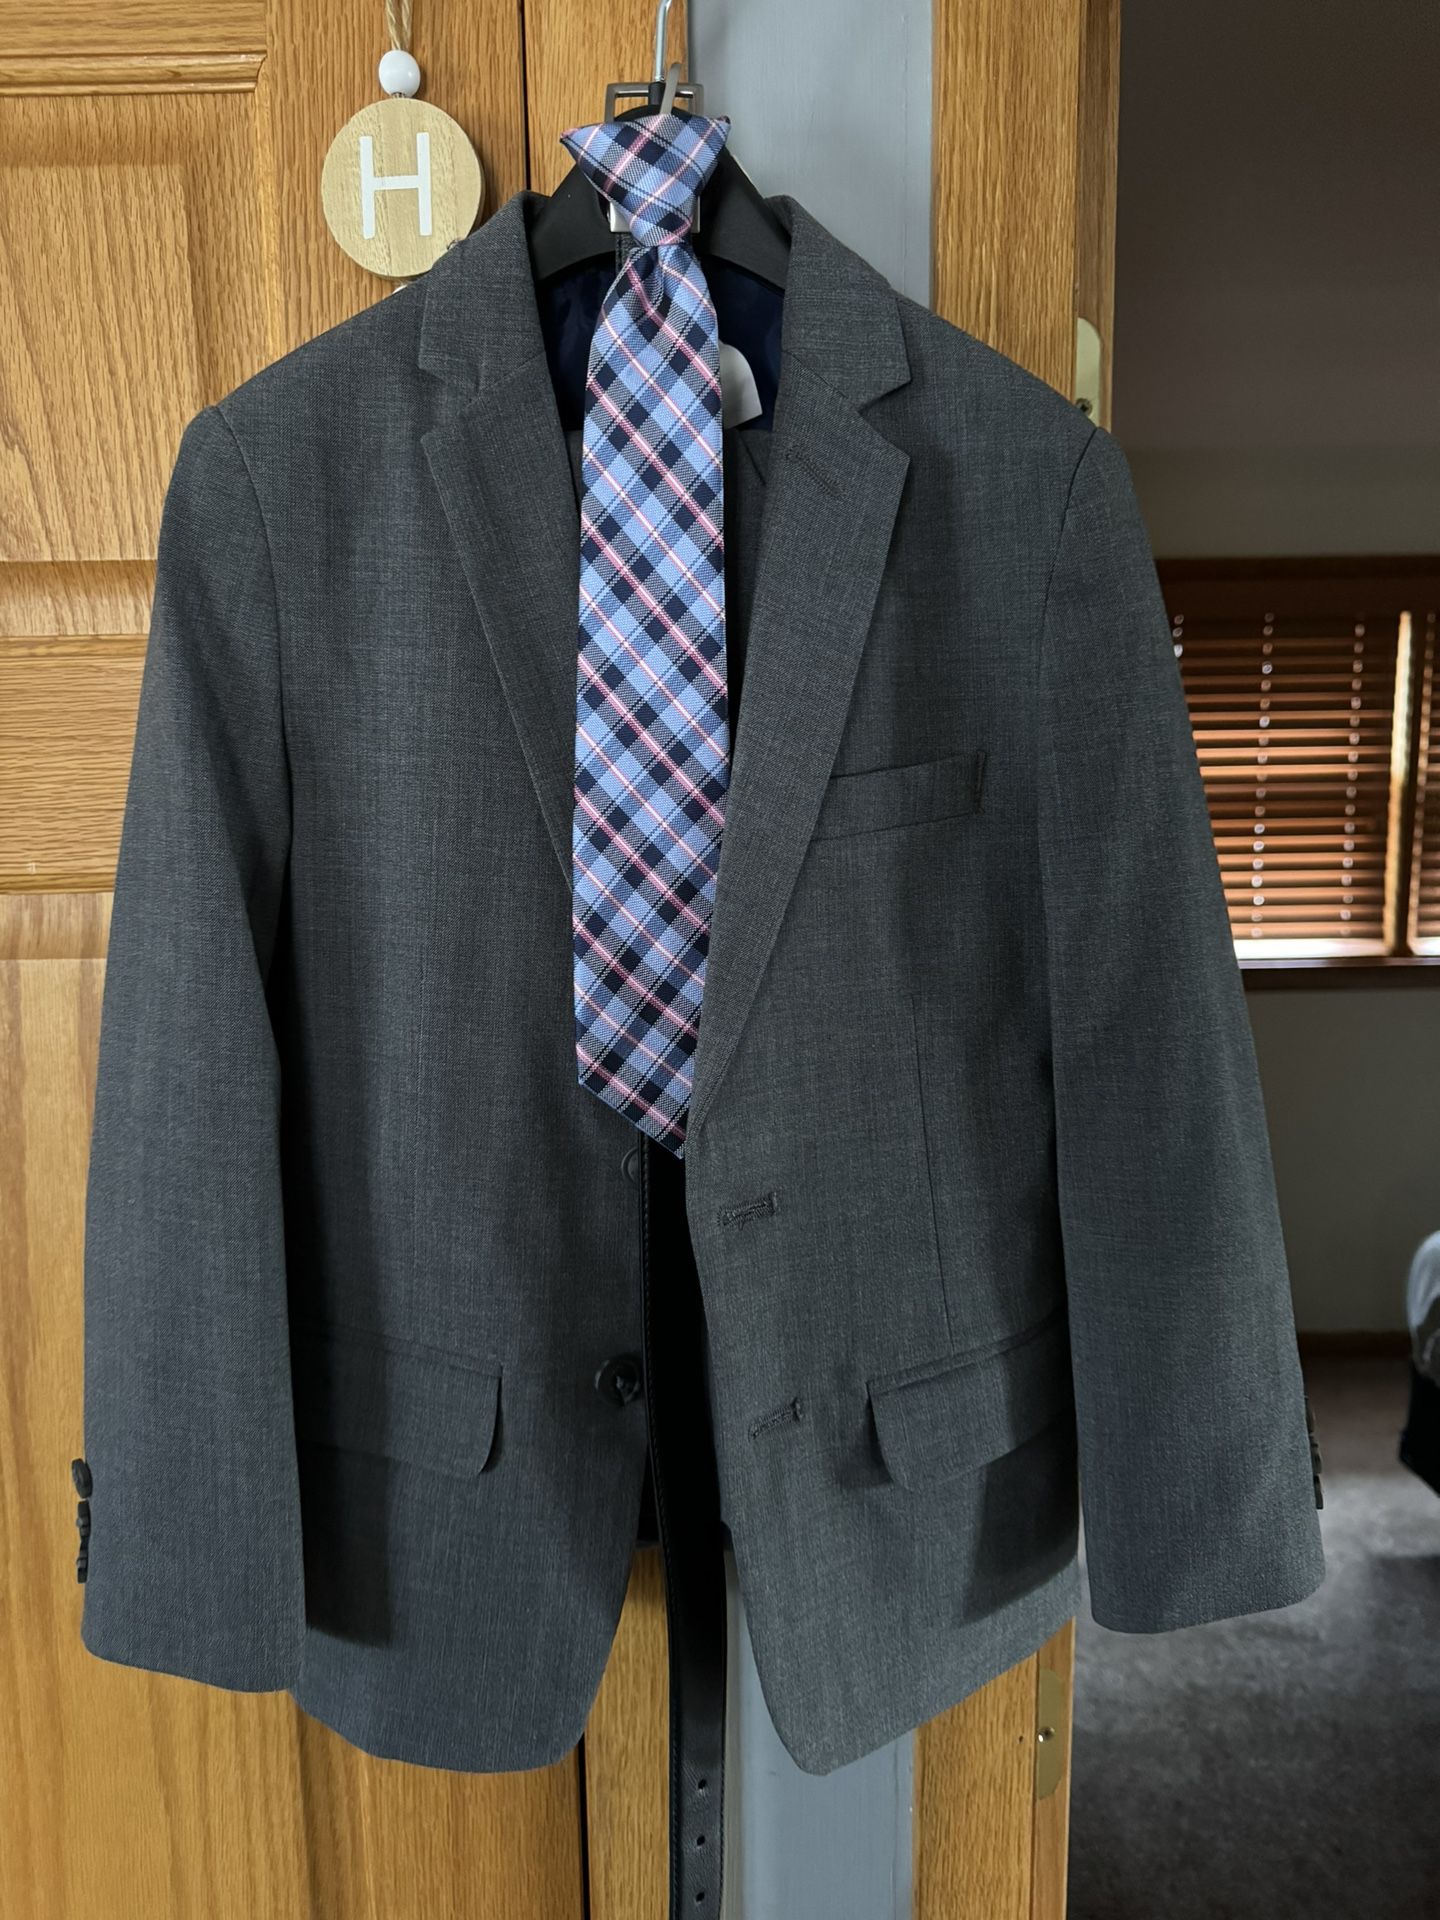 Nautica Boys 2 Piece Gray Suit Set- Size 8 Regular- Will Also Include Snap On Tie And Belt!! 